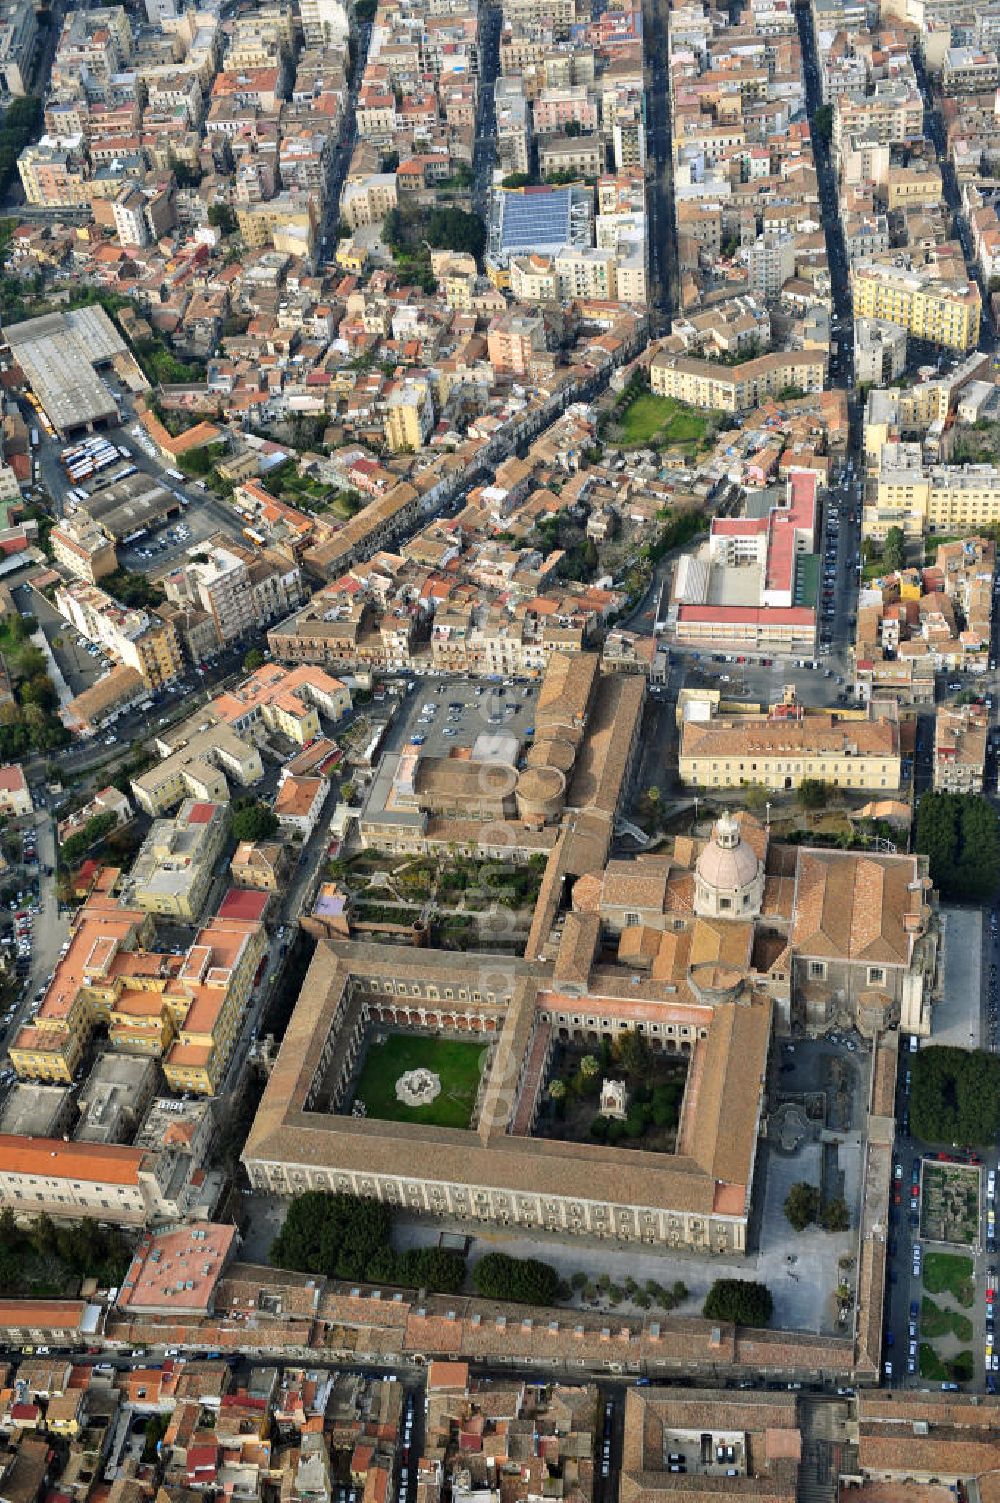 Aerial image Catania Sizilien - The monastery was originally a Benedictine monastery of San Nicola and now houses part of the University of Catania, with the adjoining unfinished church of San Nicola l'Arena Cantania on Sicily in Italy